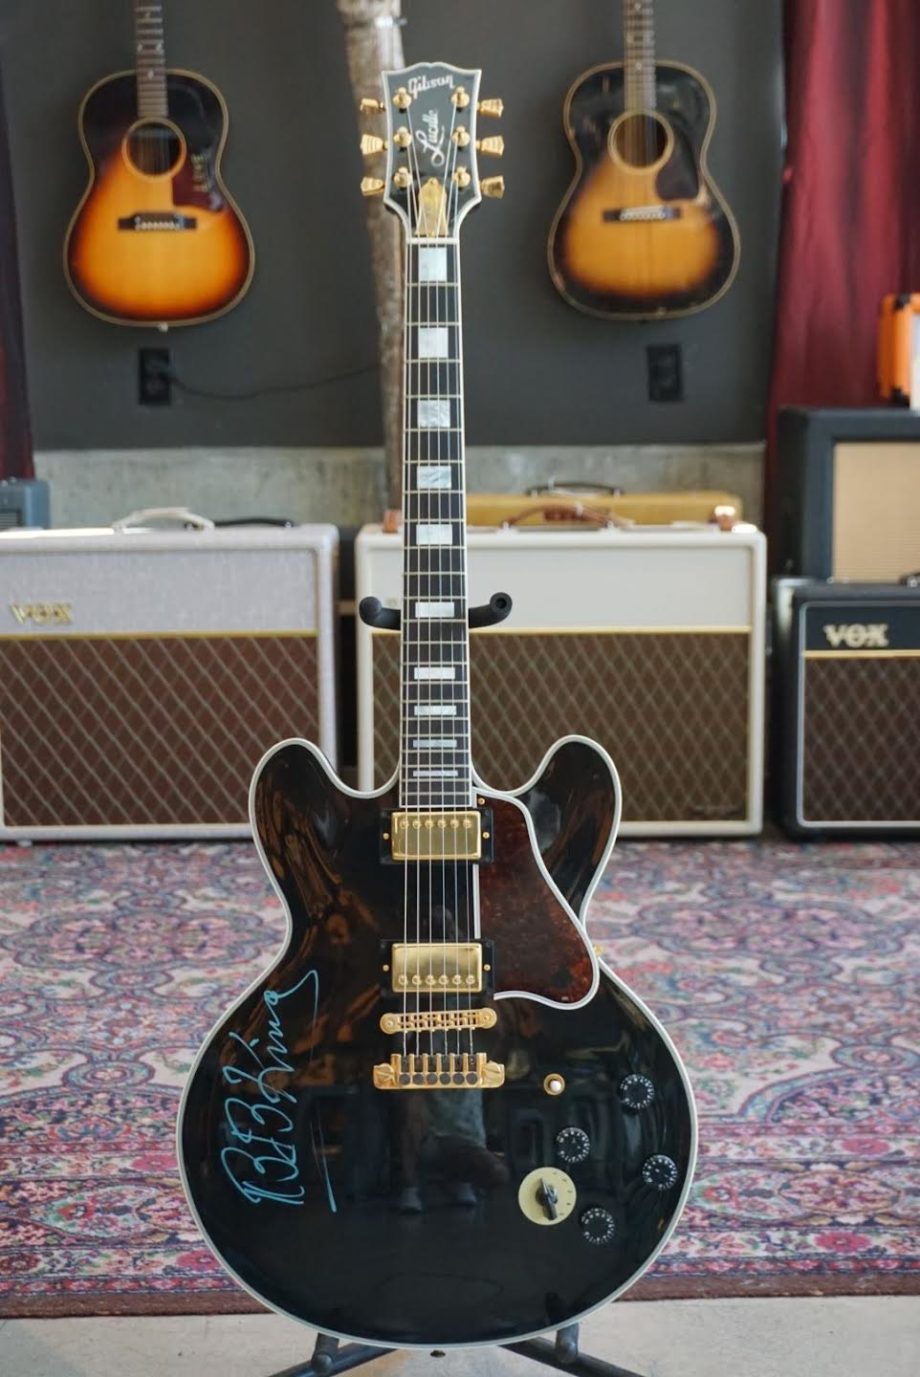 1997 Gibson ES-345 Lucille Signed by B.B. King